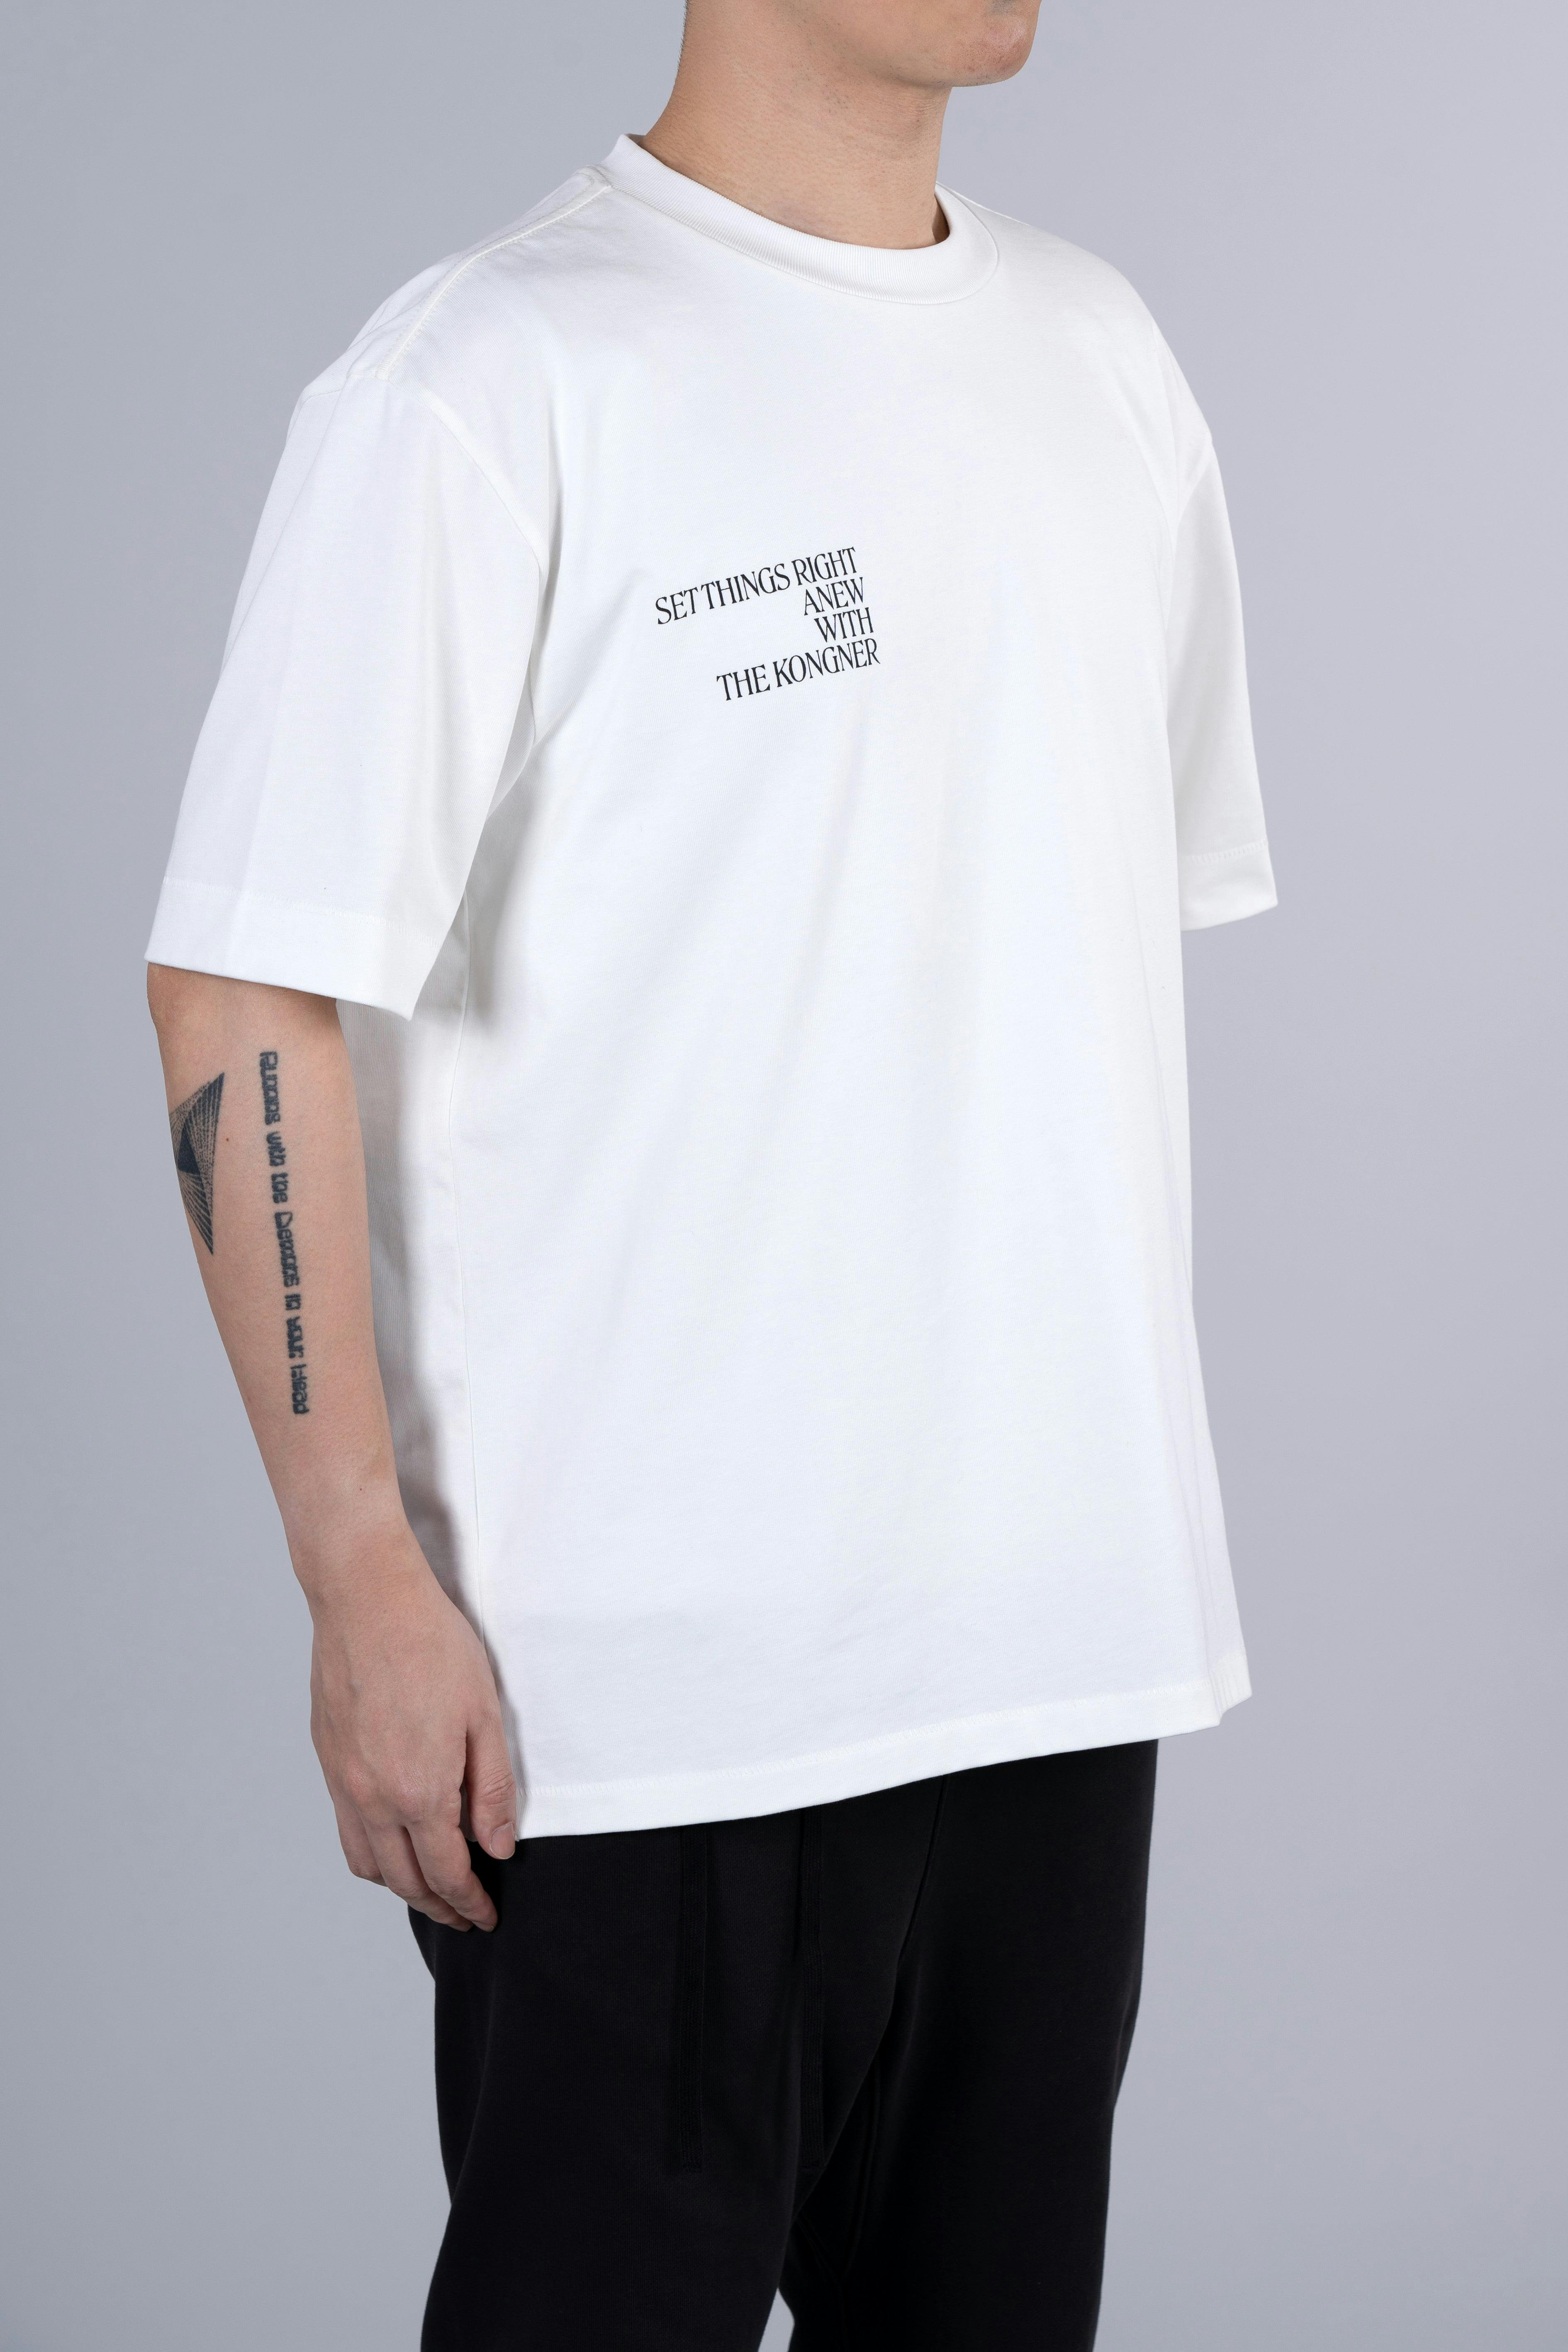 ˝SET THINGS RIGHT˝ Regular T-Shirt - Decayed White